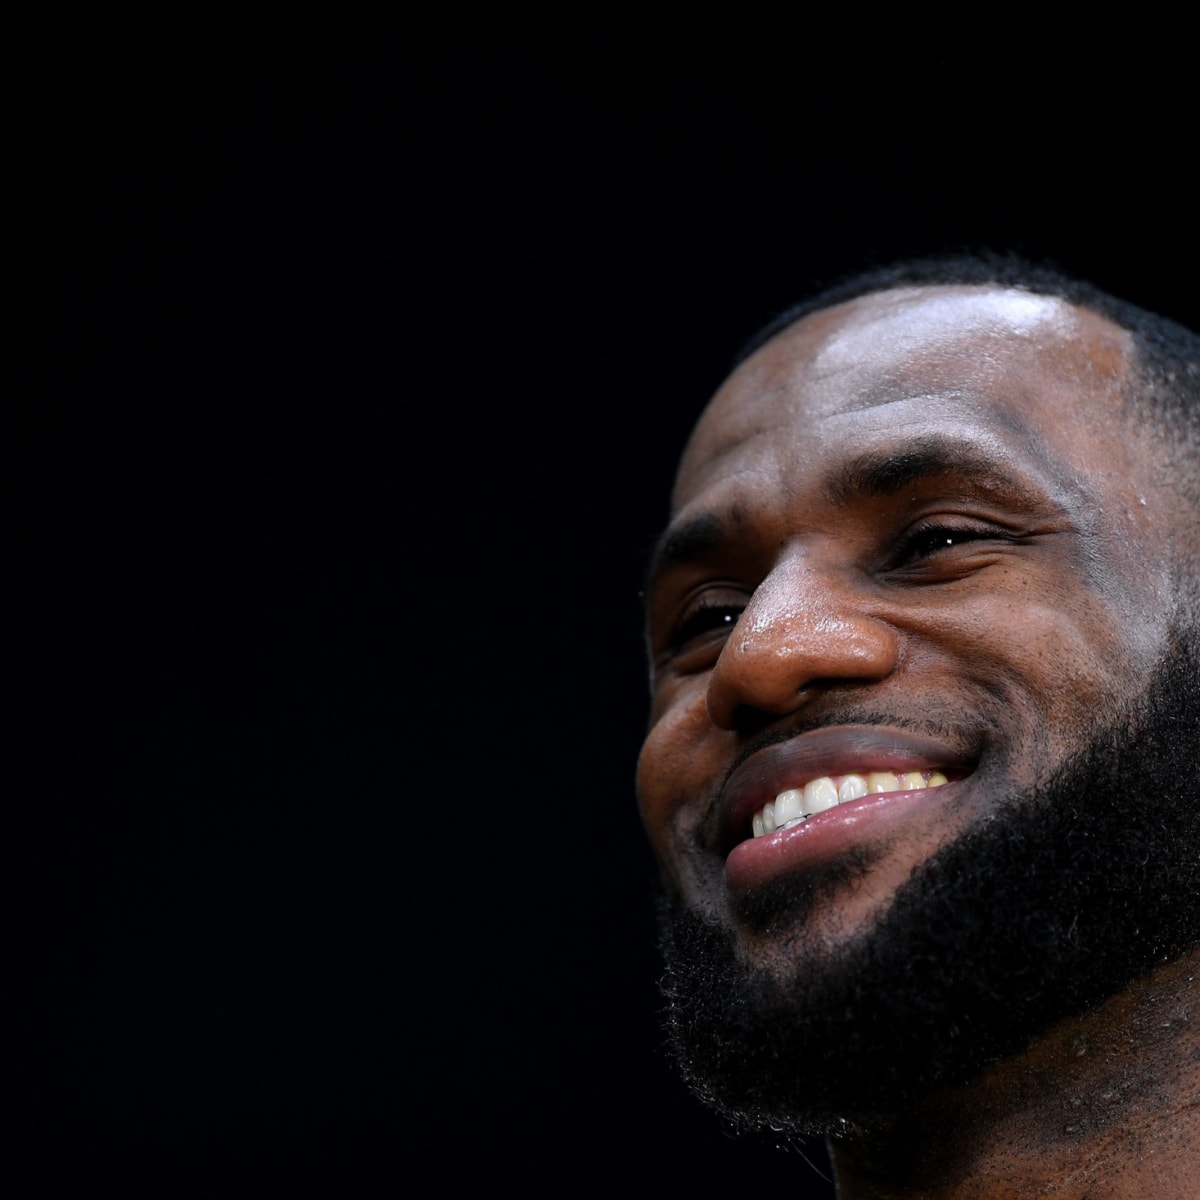 Rare LeBron James rookie card expected to set record auction price